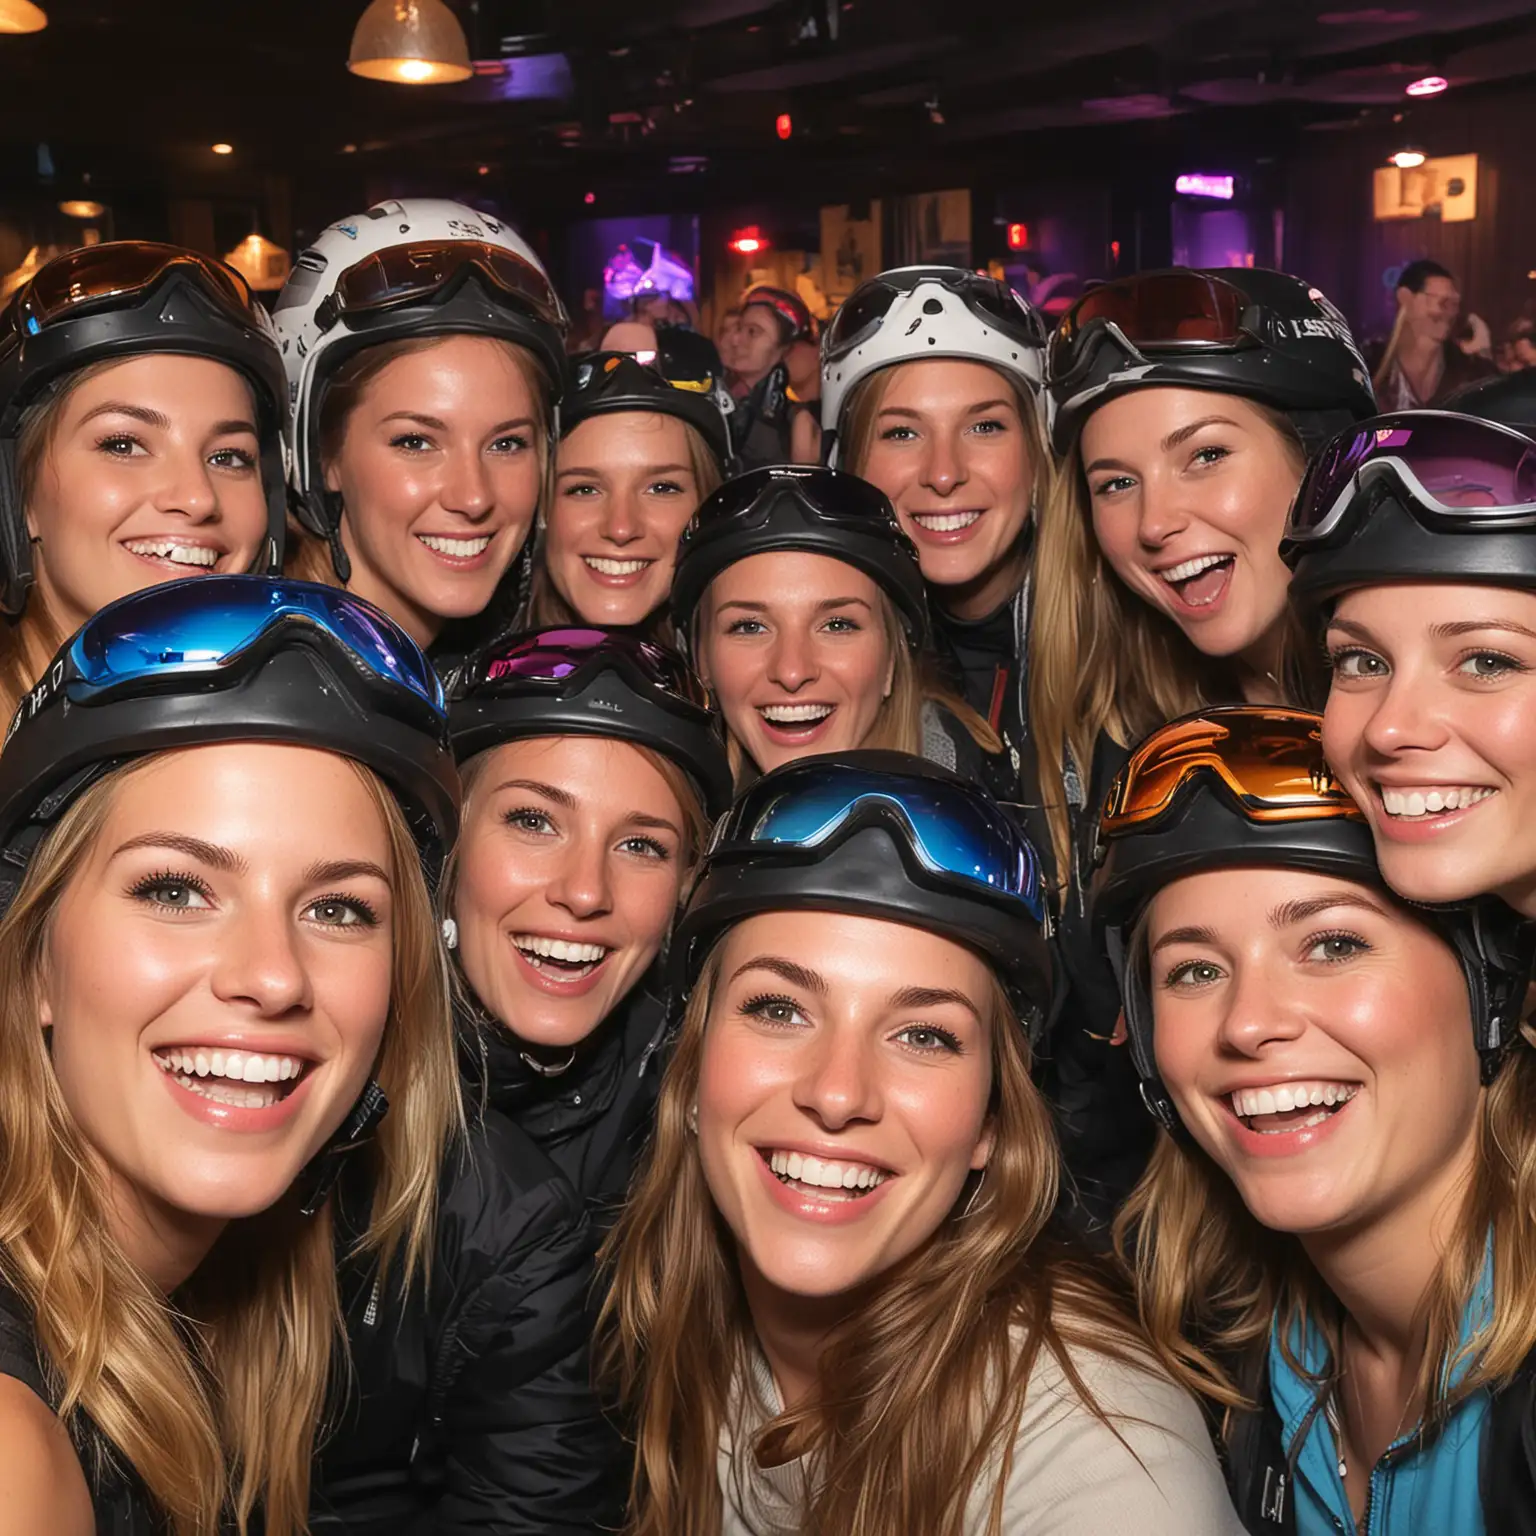 A LOT of smily, females,skihelmet,having fun at afterskiparty, club silverbuilet.